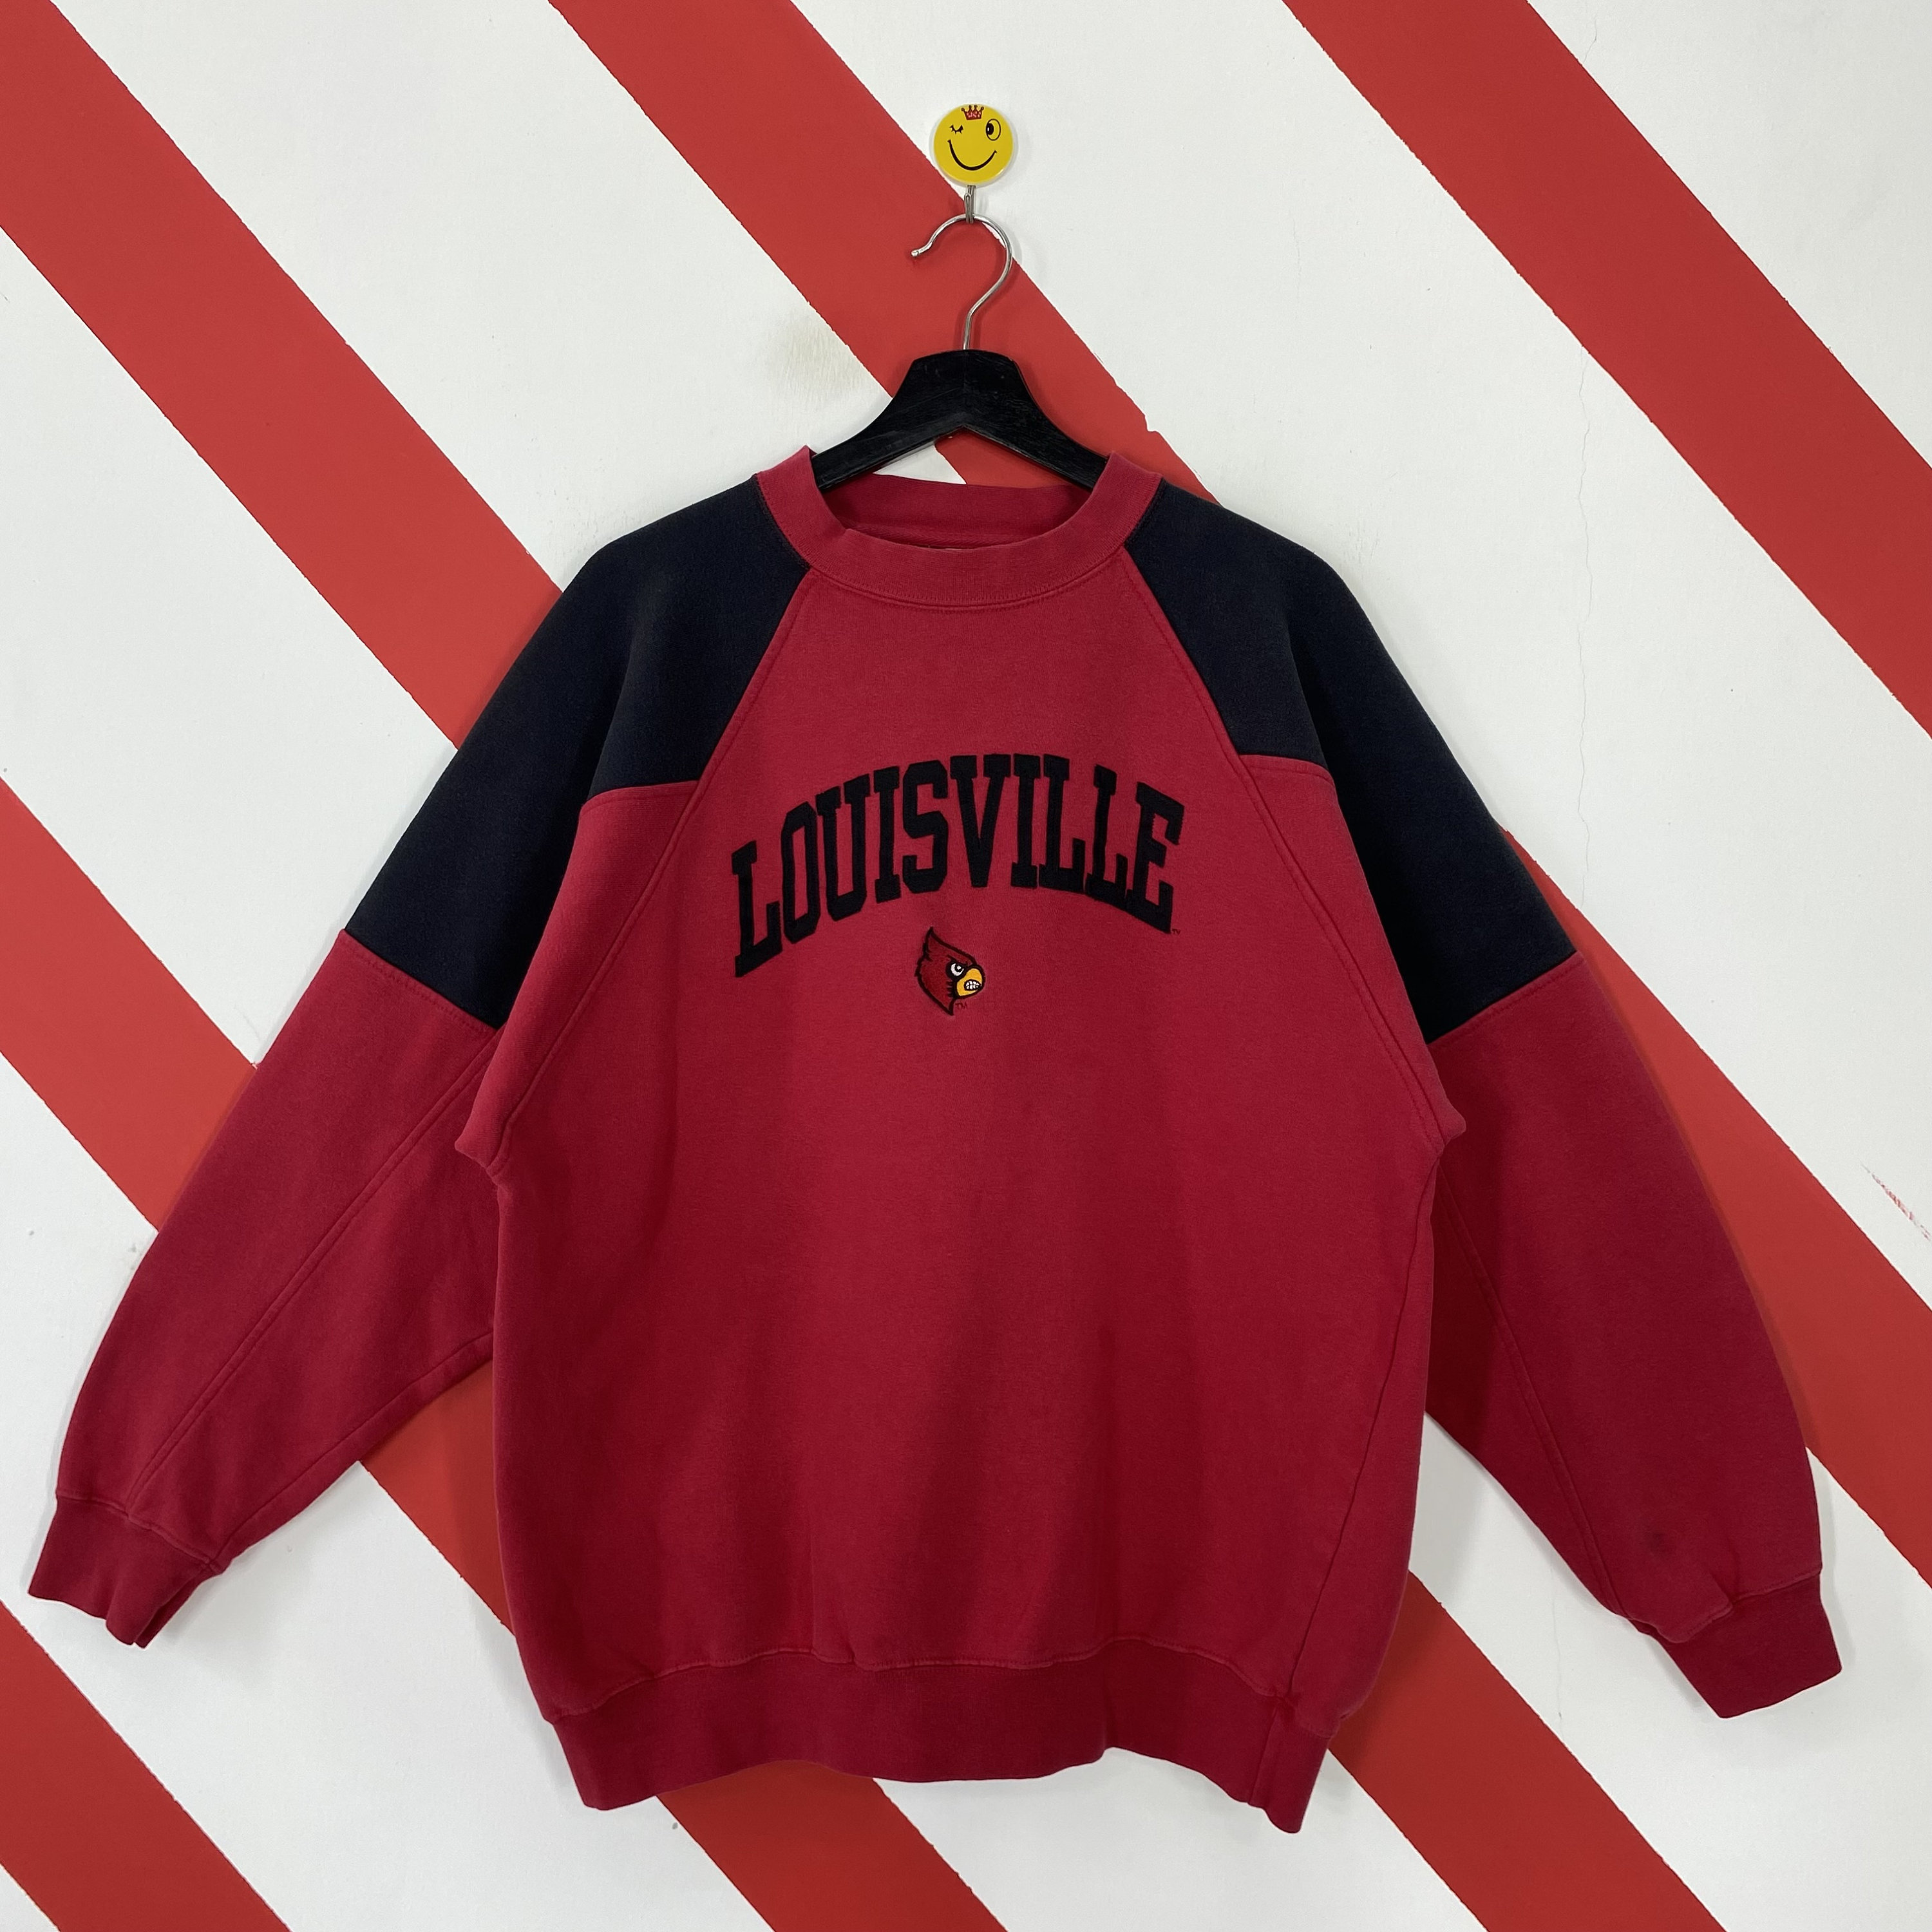 LOUISVILLE Cardinals Baby Girls Cheerleading 2 Pc Outfit Set - Sz 24 Mos 2T